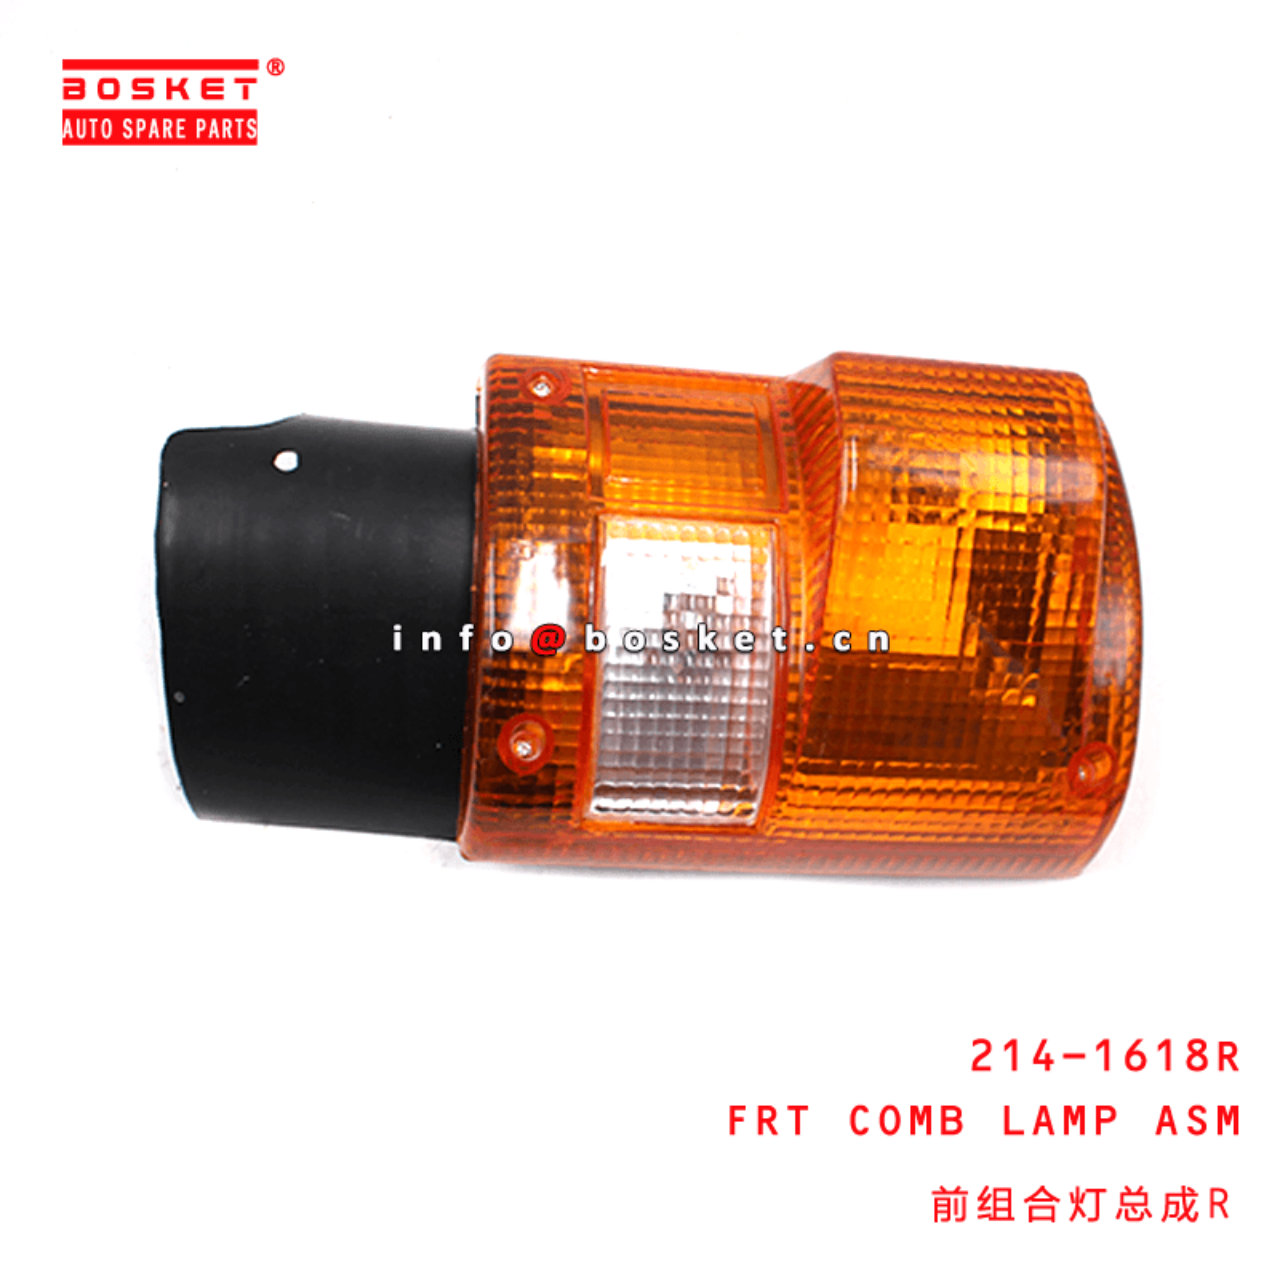 214-1618R Front Combination Lamp Assembly Suitable For MITSUBISHI FUSO 